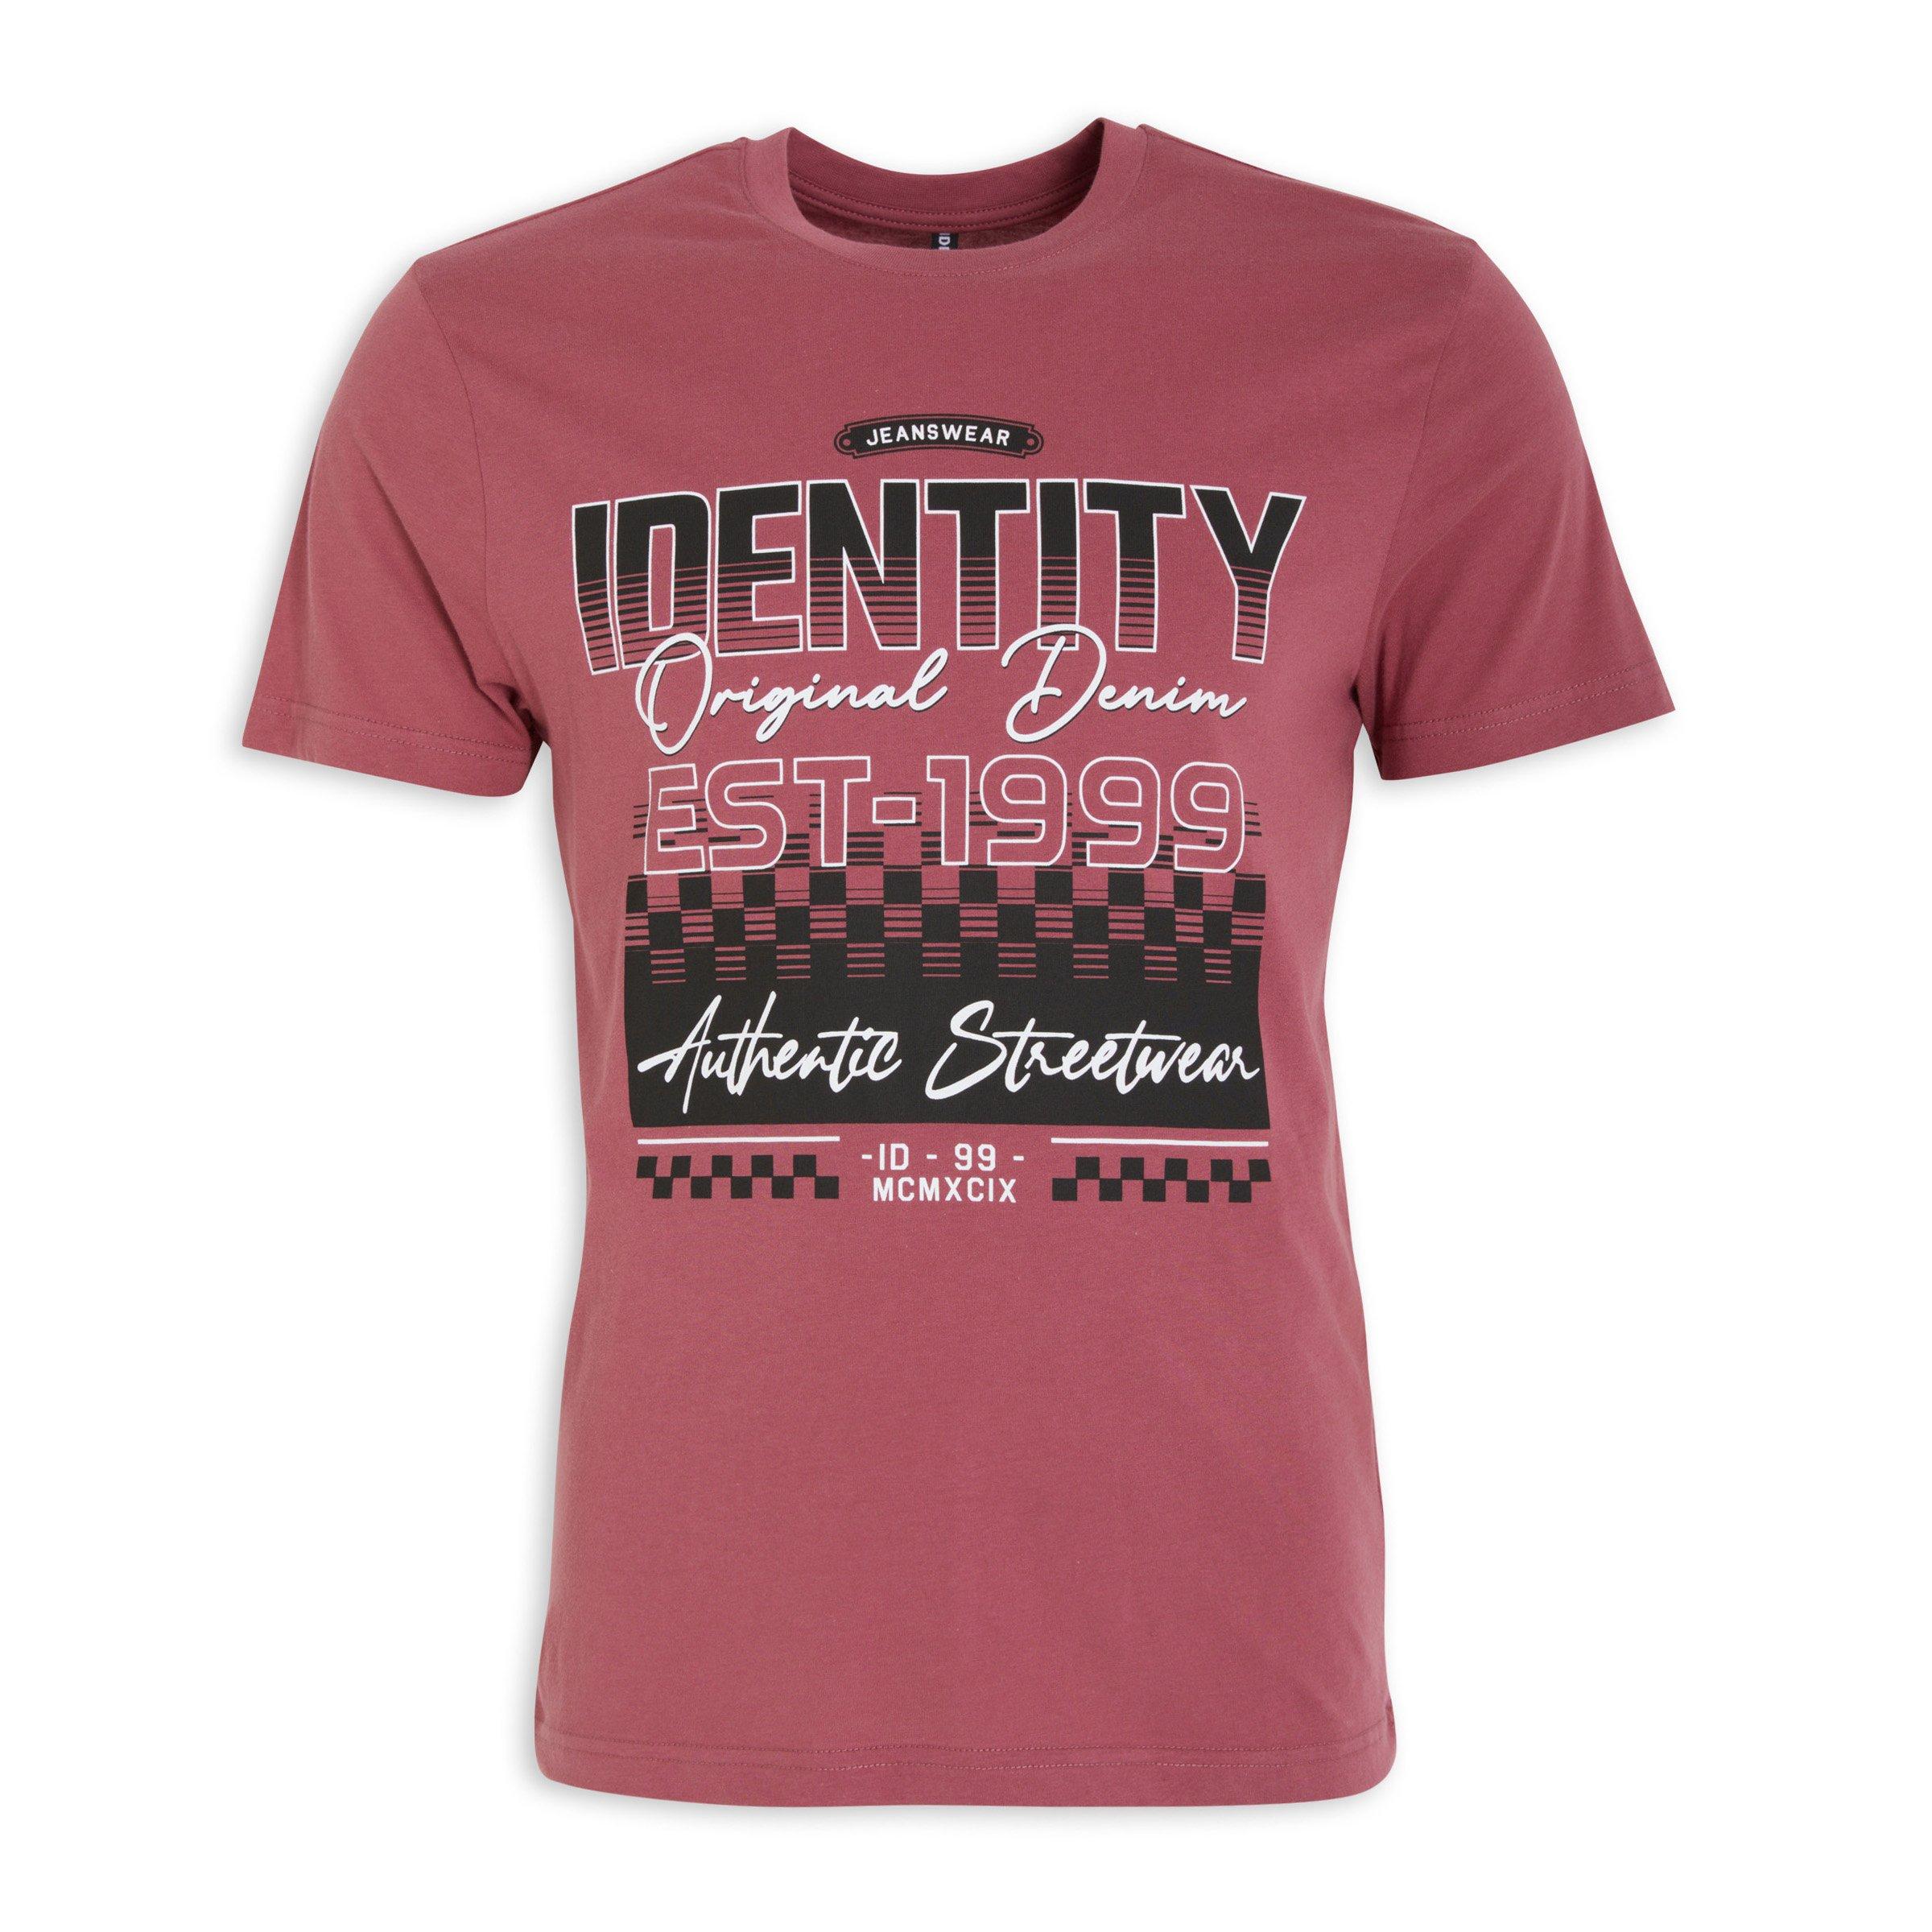 Pink Branded T-shirt (3116596)